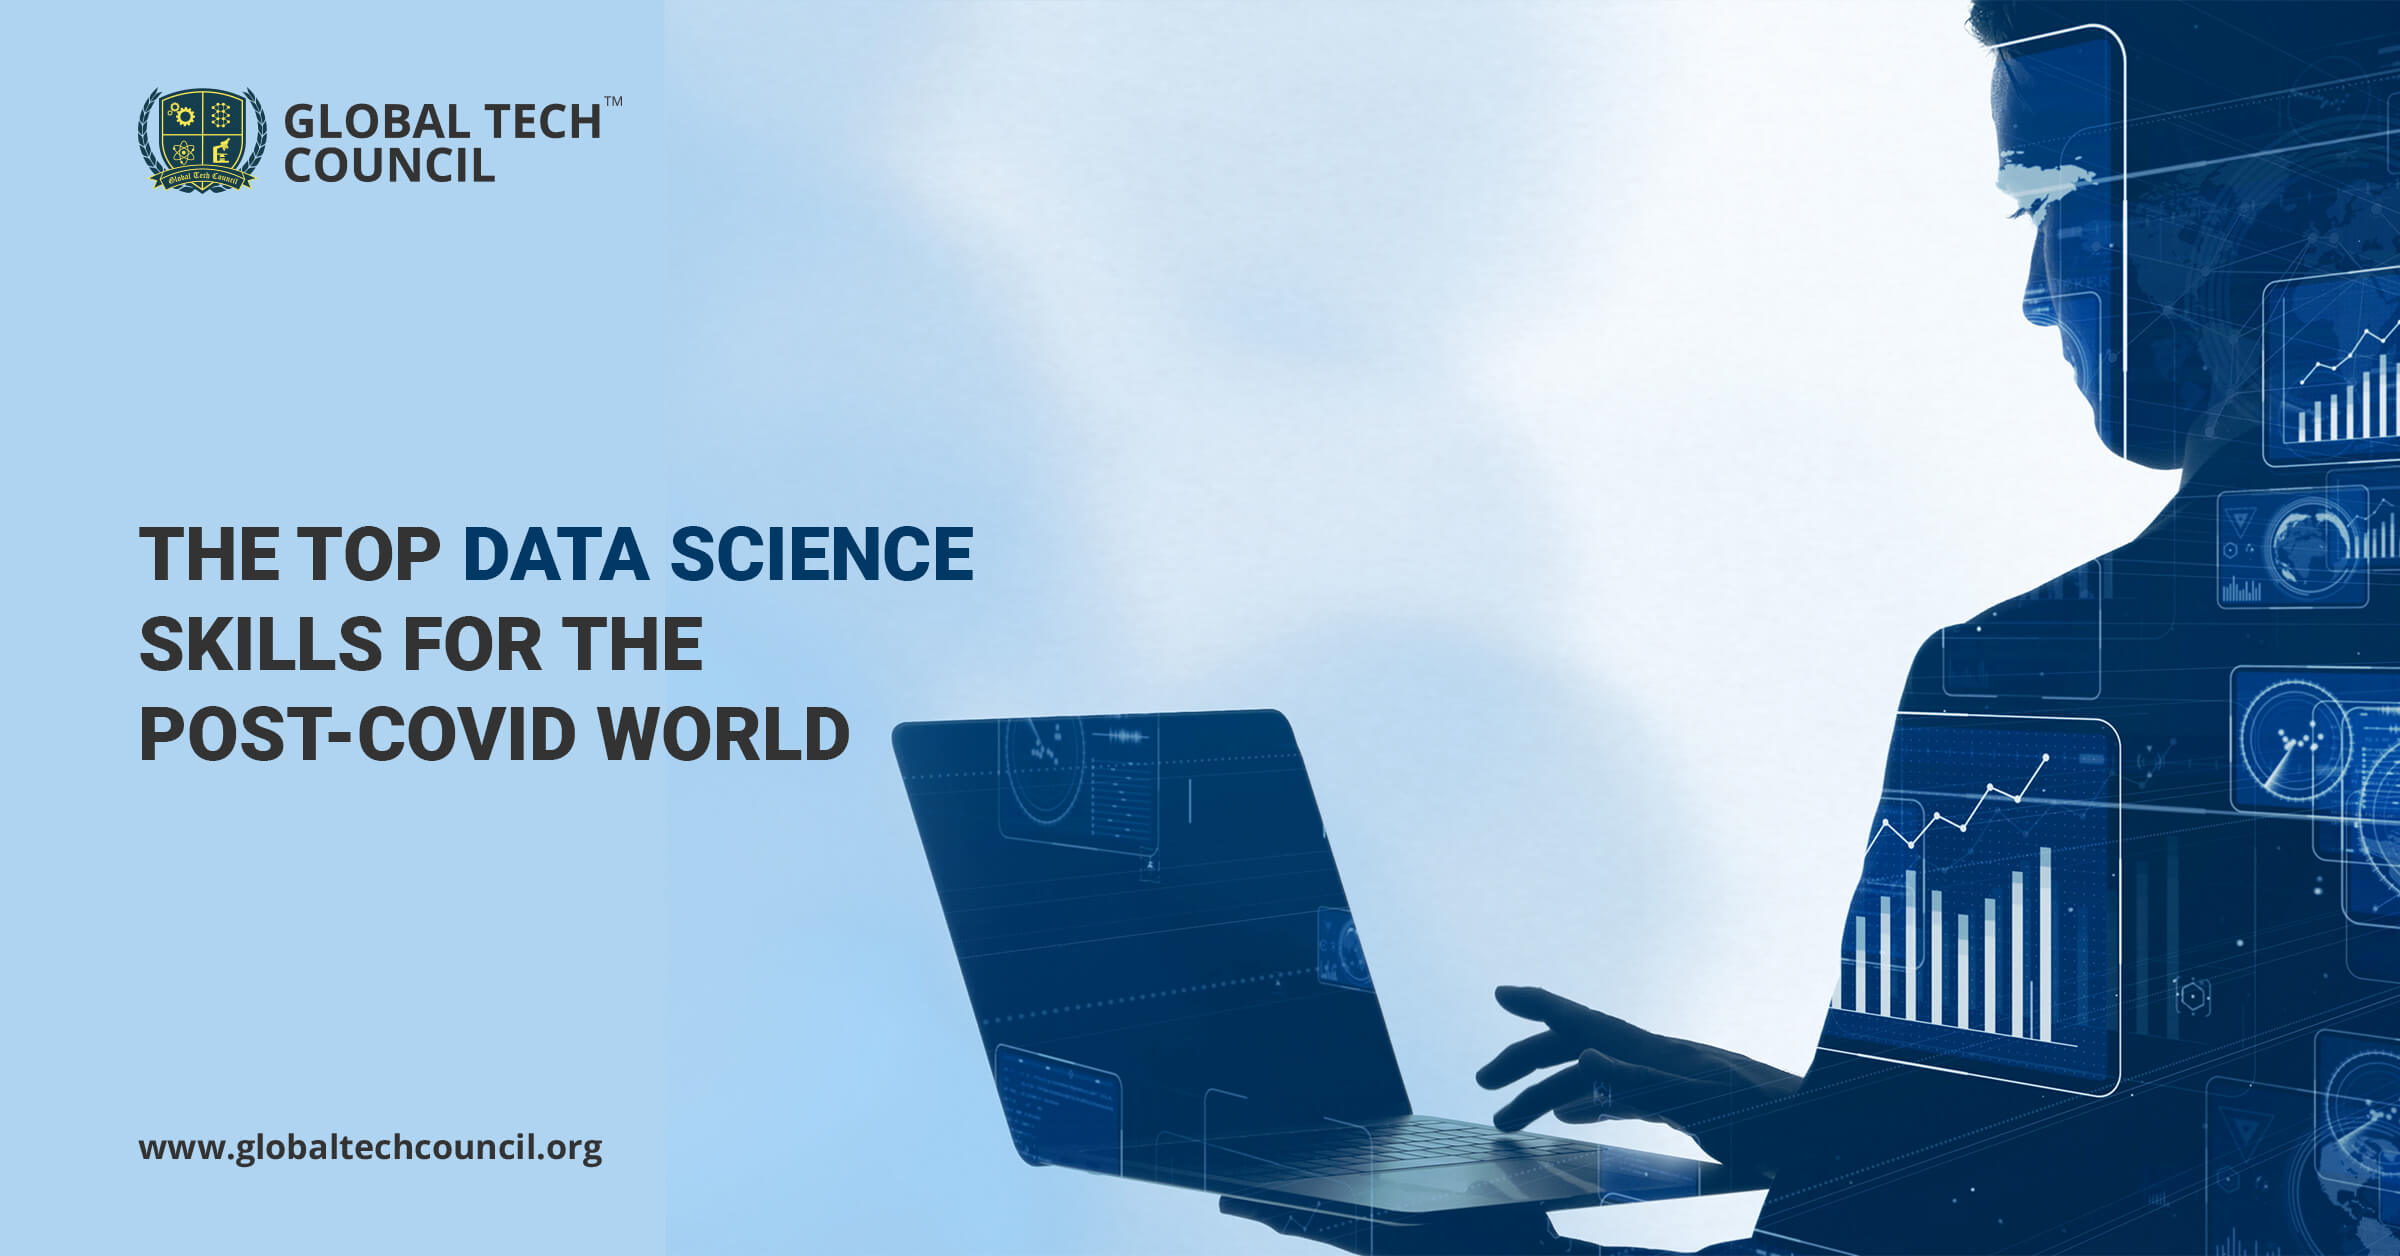 The top data science skills for the post-Covid world